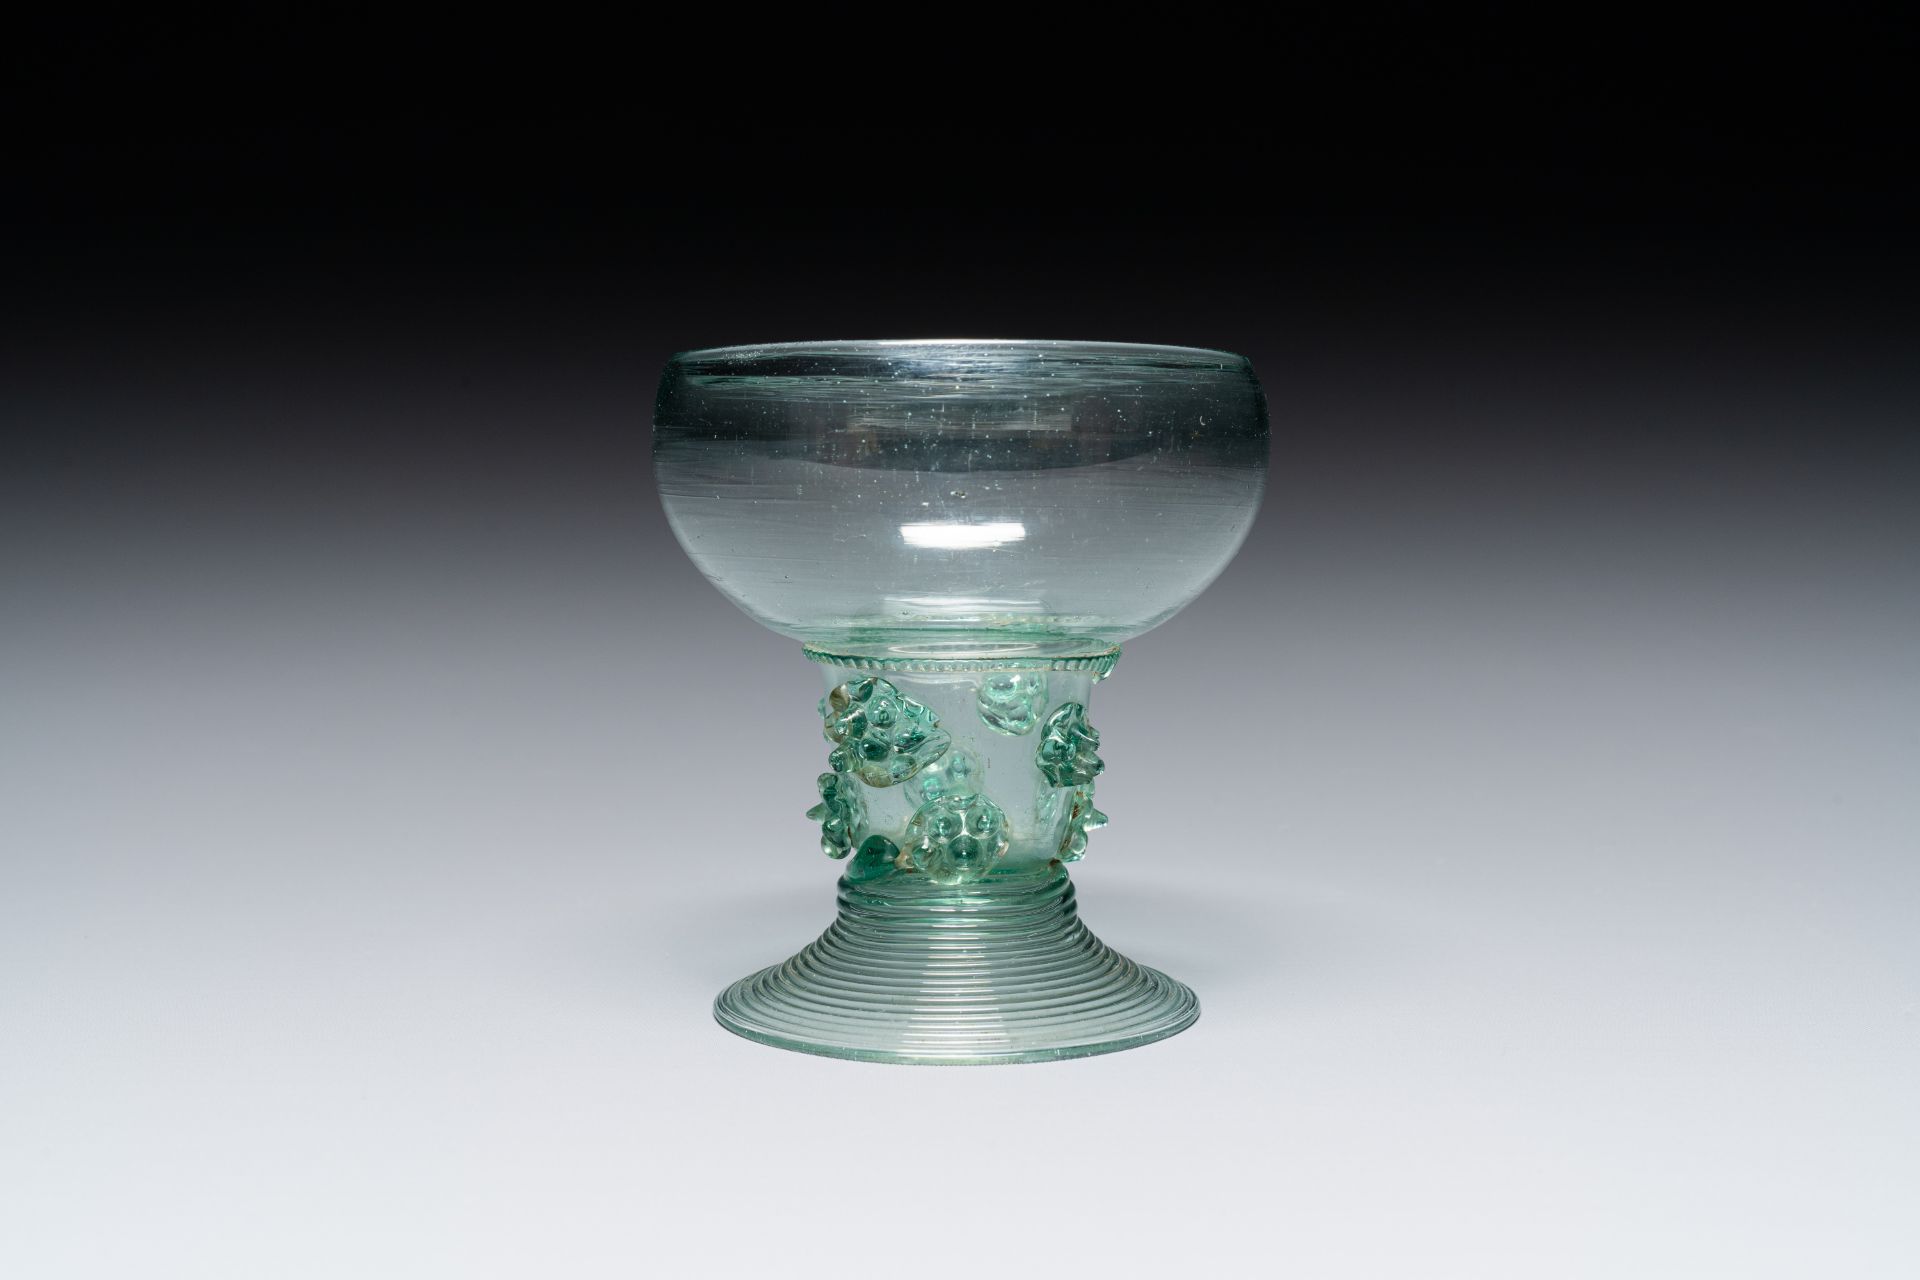 A Dutch or German green glass rummer, 2nd quarter of the 17th C. - Image 4 of 7